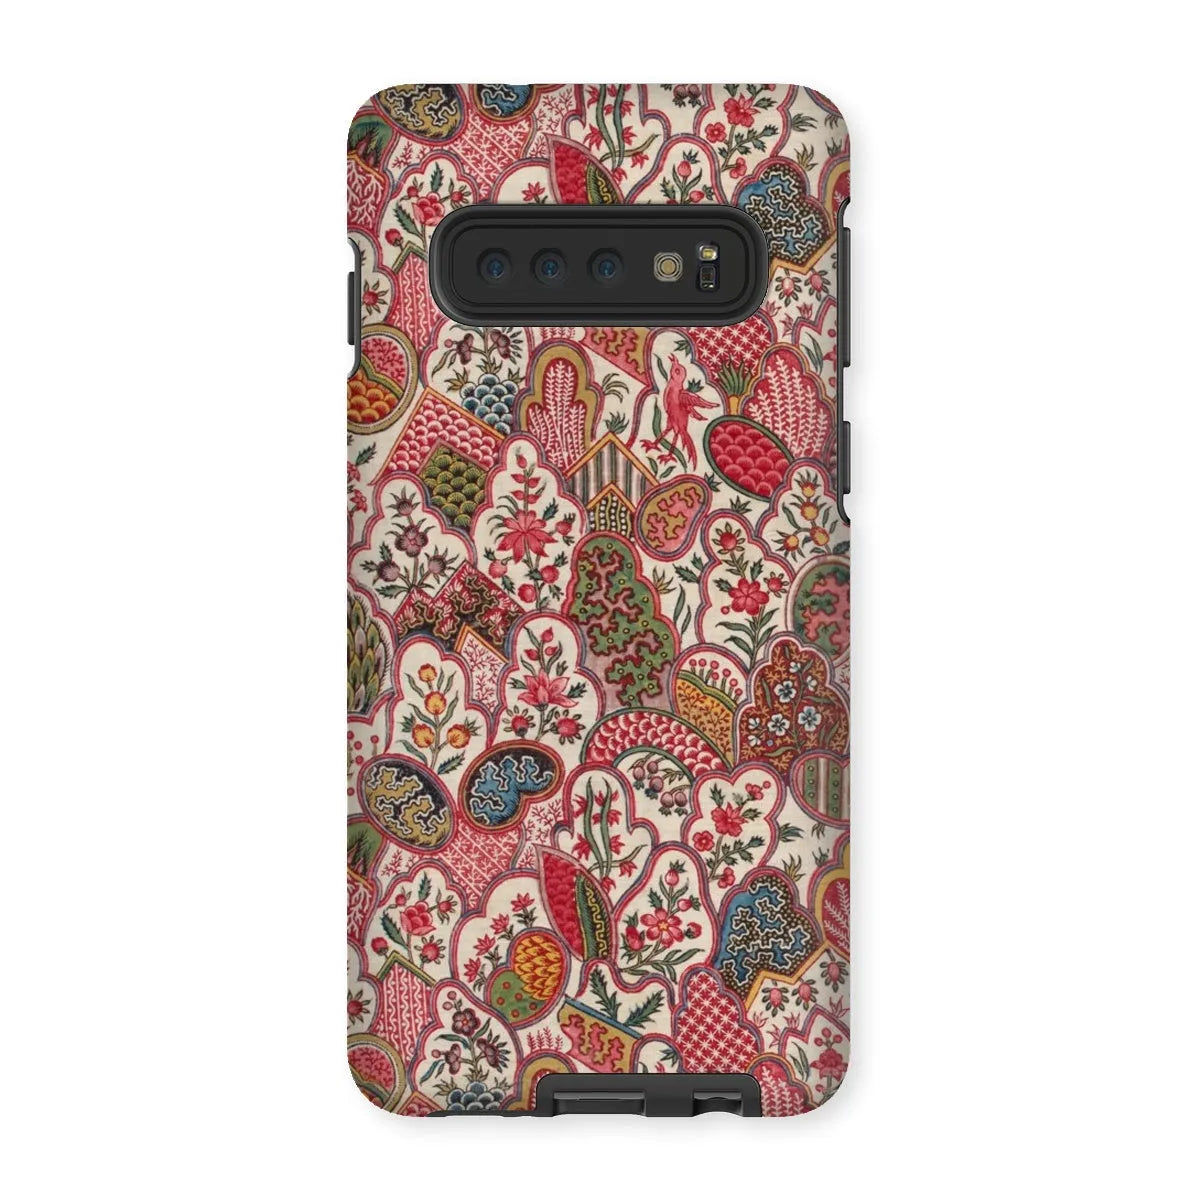 Oberkampf & Cie. Vintage Pattern Fabric - Art Phone Case - Samsung Galaxy S10 / Matte - Mobile Phone Cases - Aesthetic